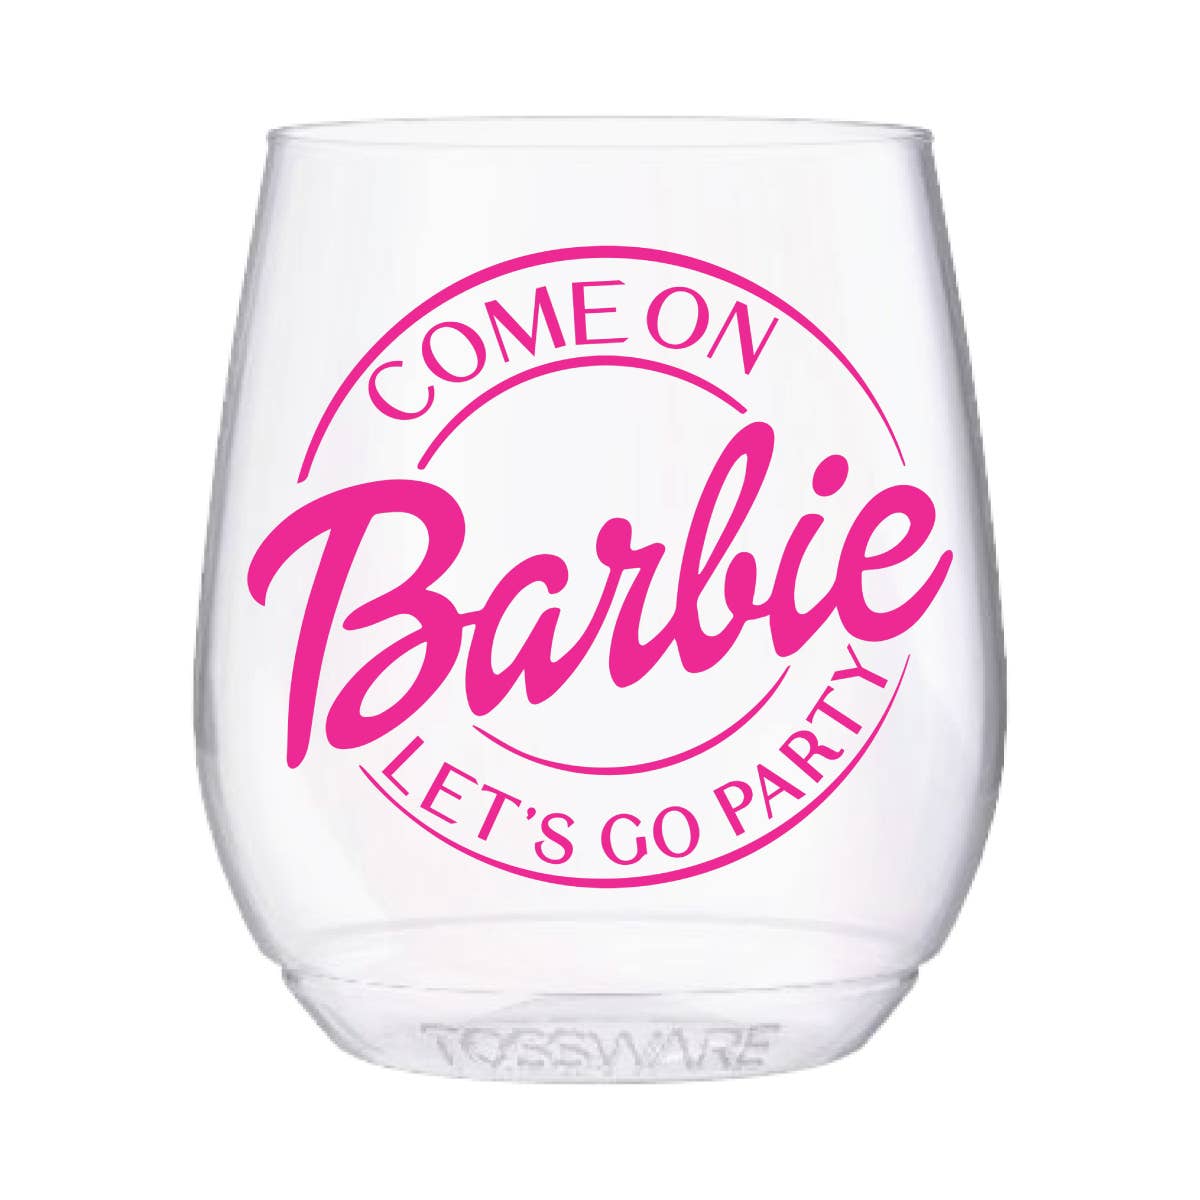 Come on Barbie Let's Go Party Stemless Wine Tossware